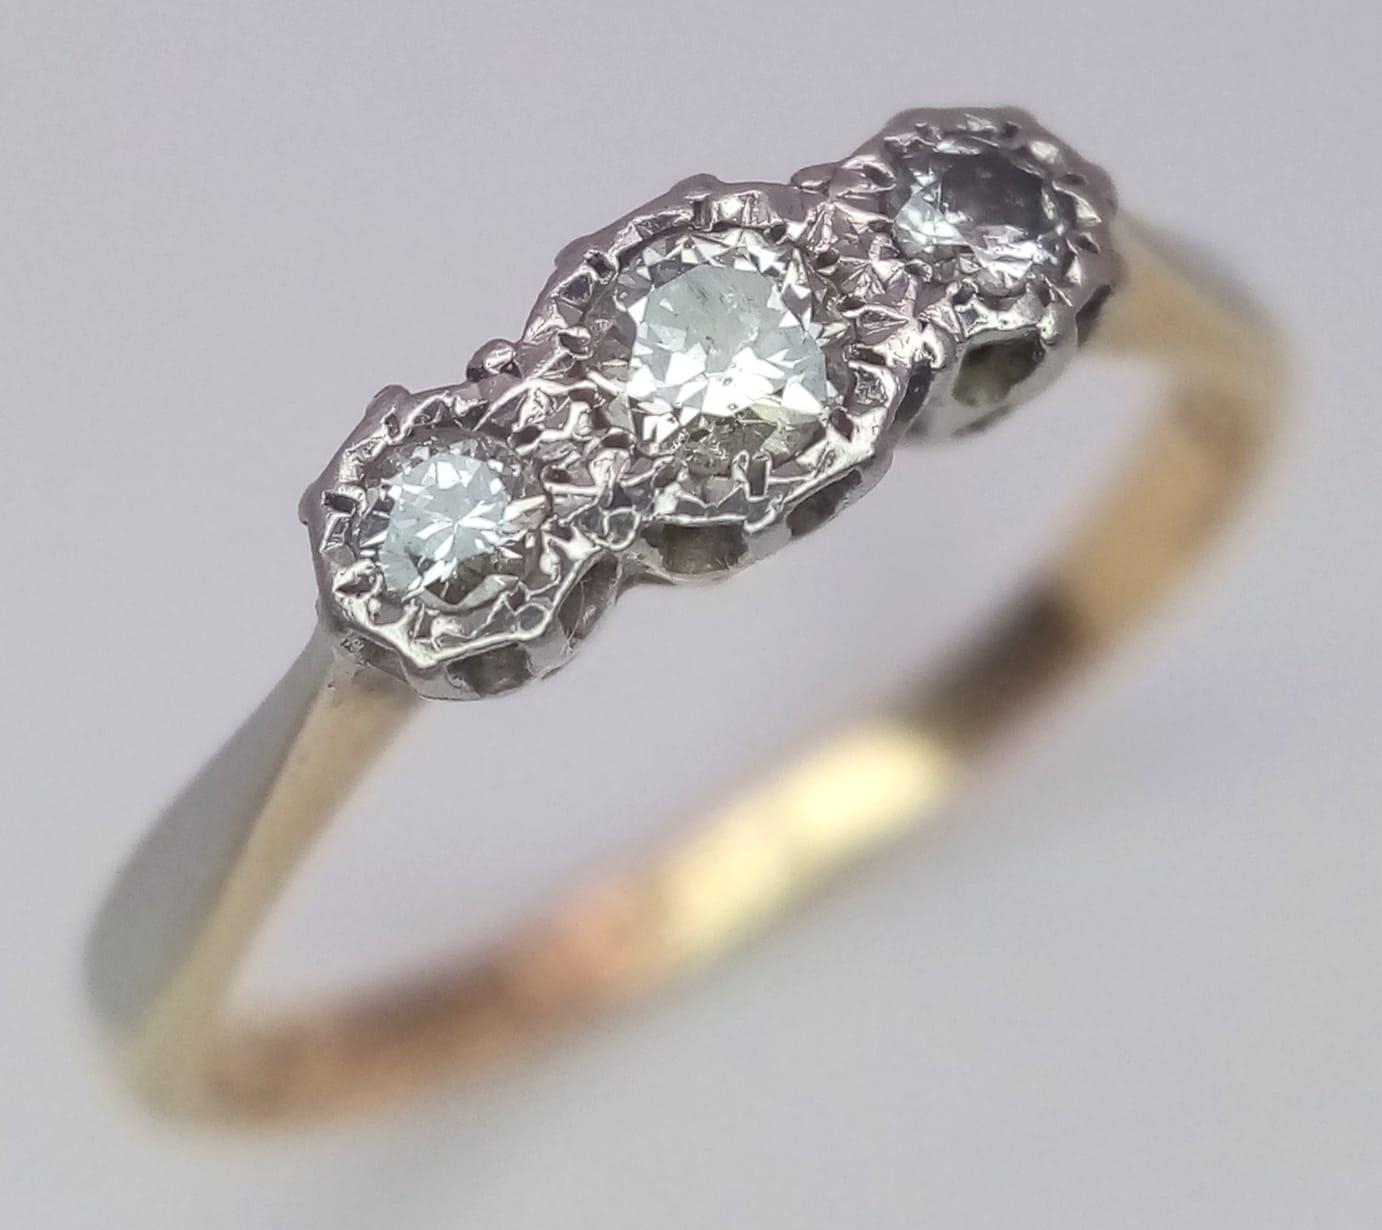 An 18 K yellow gold and platinum ring with a trilogy of round cut diamonds, size: L, weight: 1.9 g.